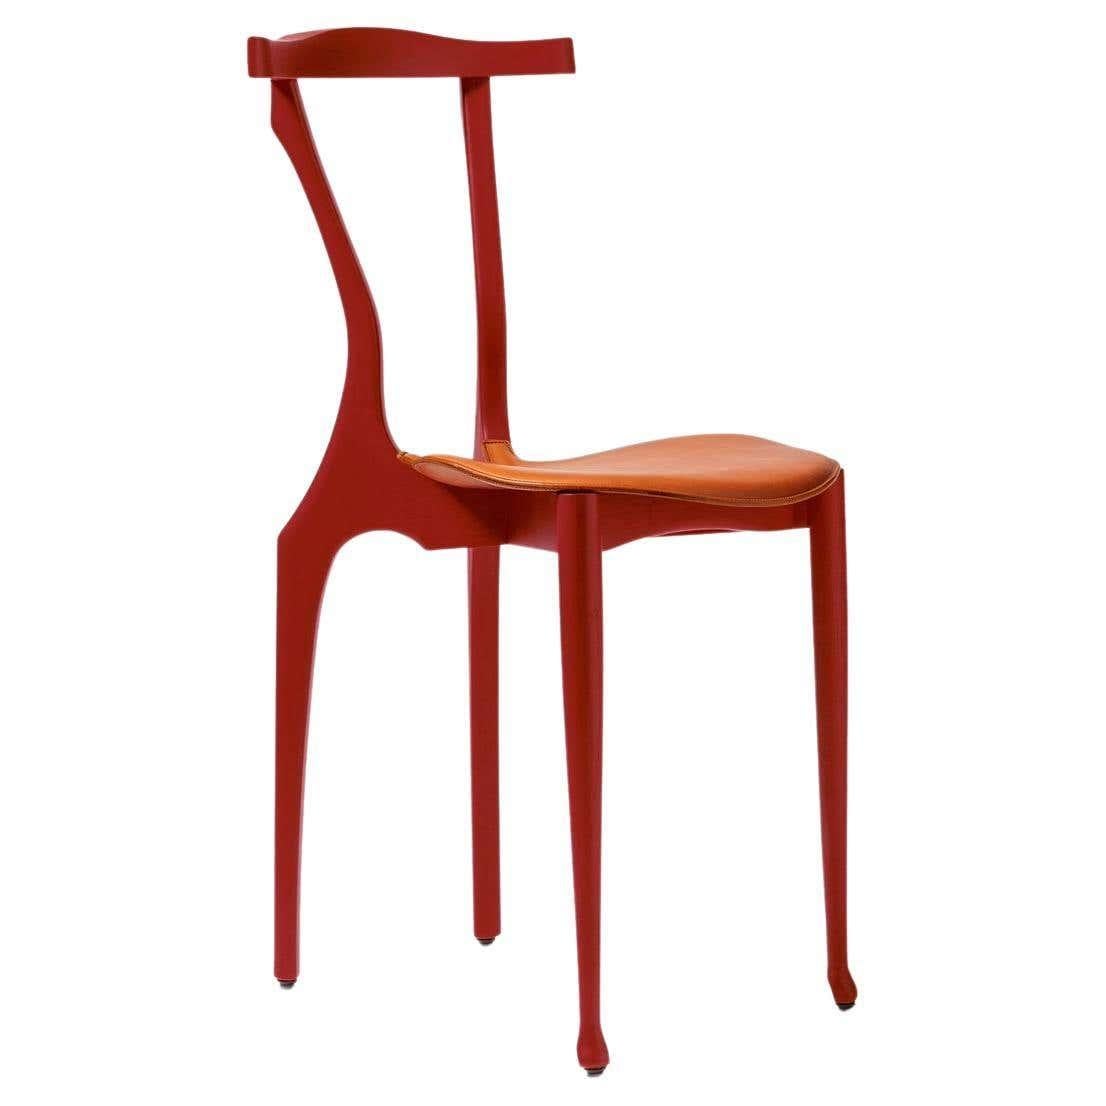 Modern Ok! 21 Century Wood Gaulinetta Chair with Natural Wood Varnished Finish For Sale